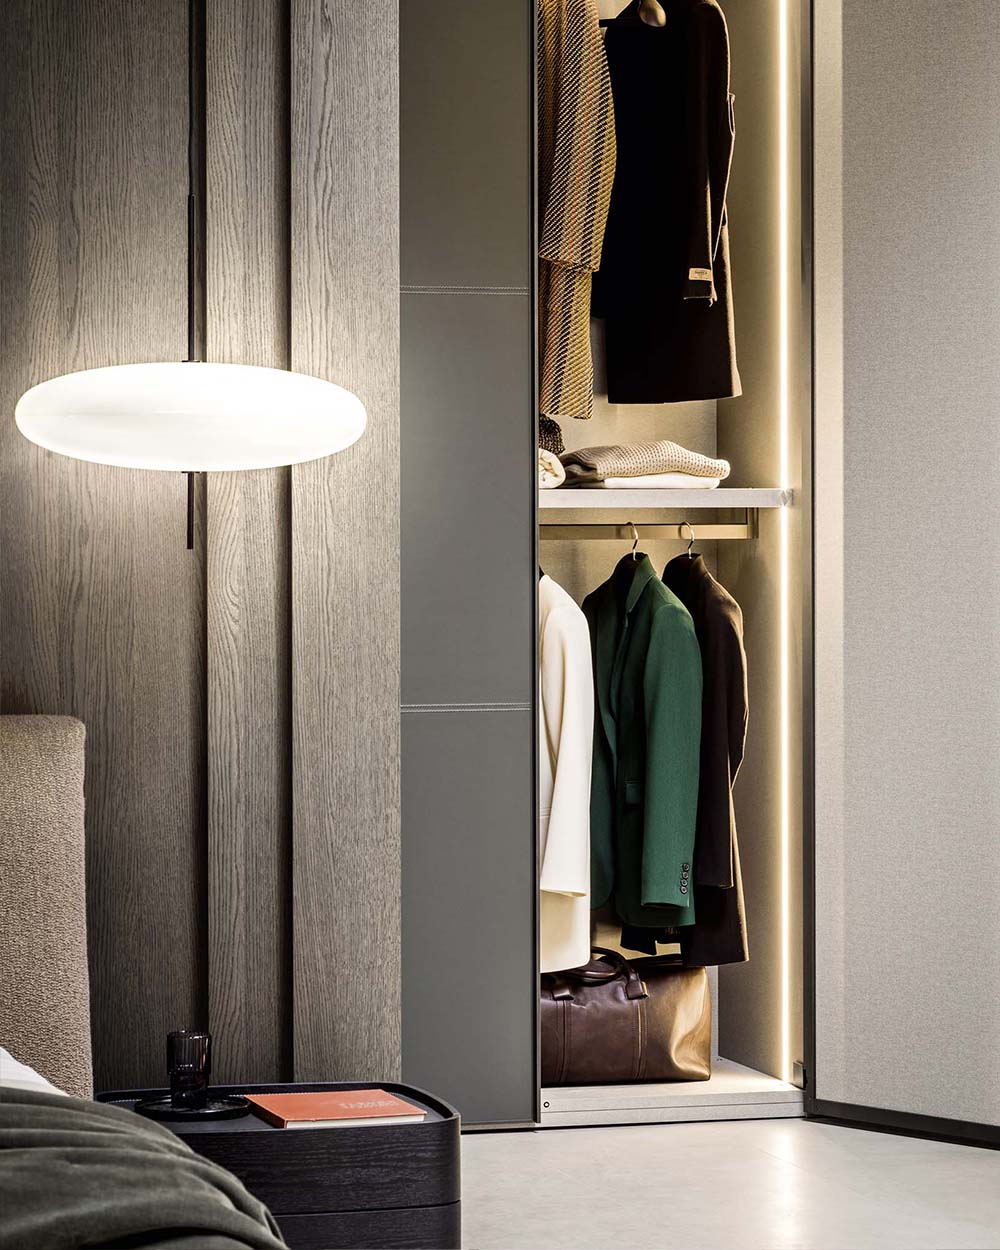 Modern, luxury glass wardrobe system. Designed to fit your interior and fitted by Krieder interior experts.